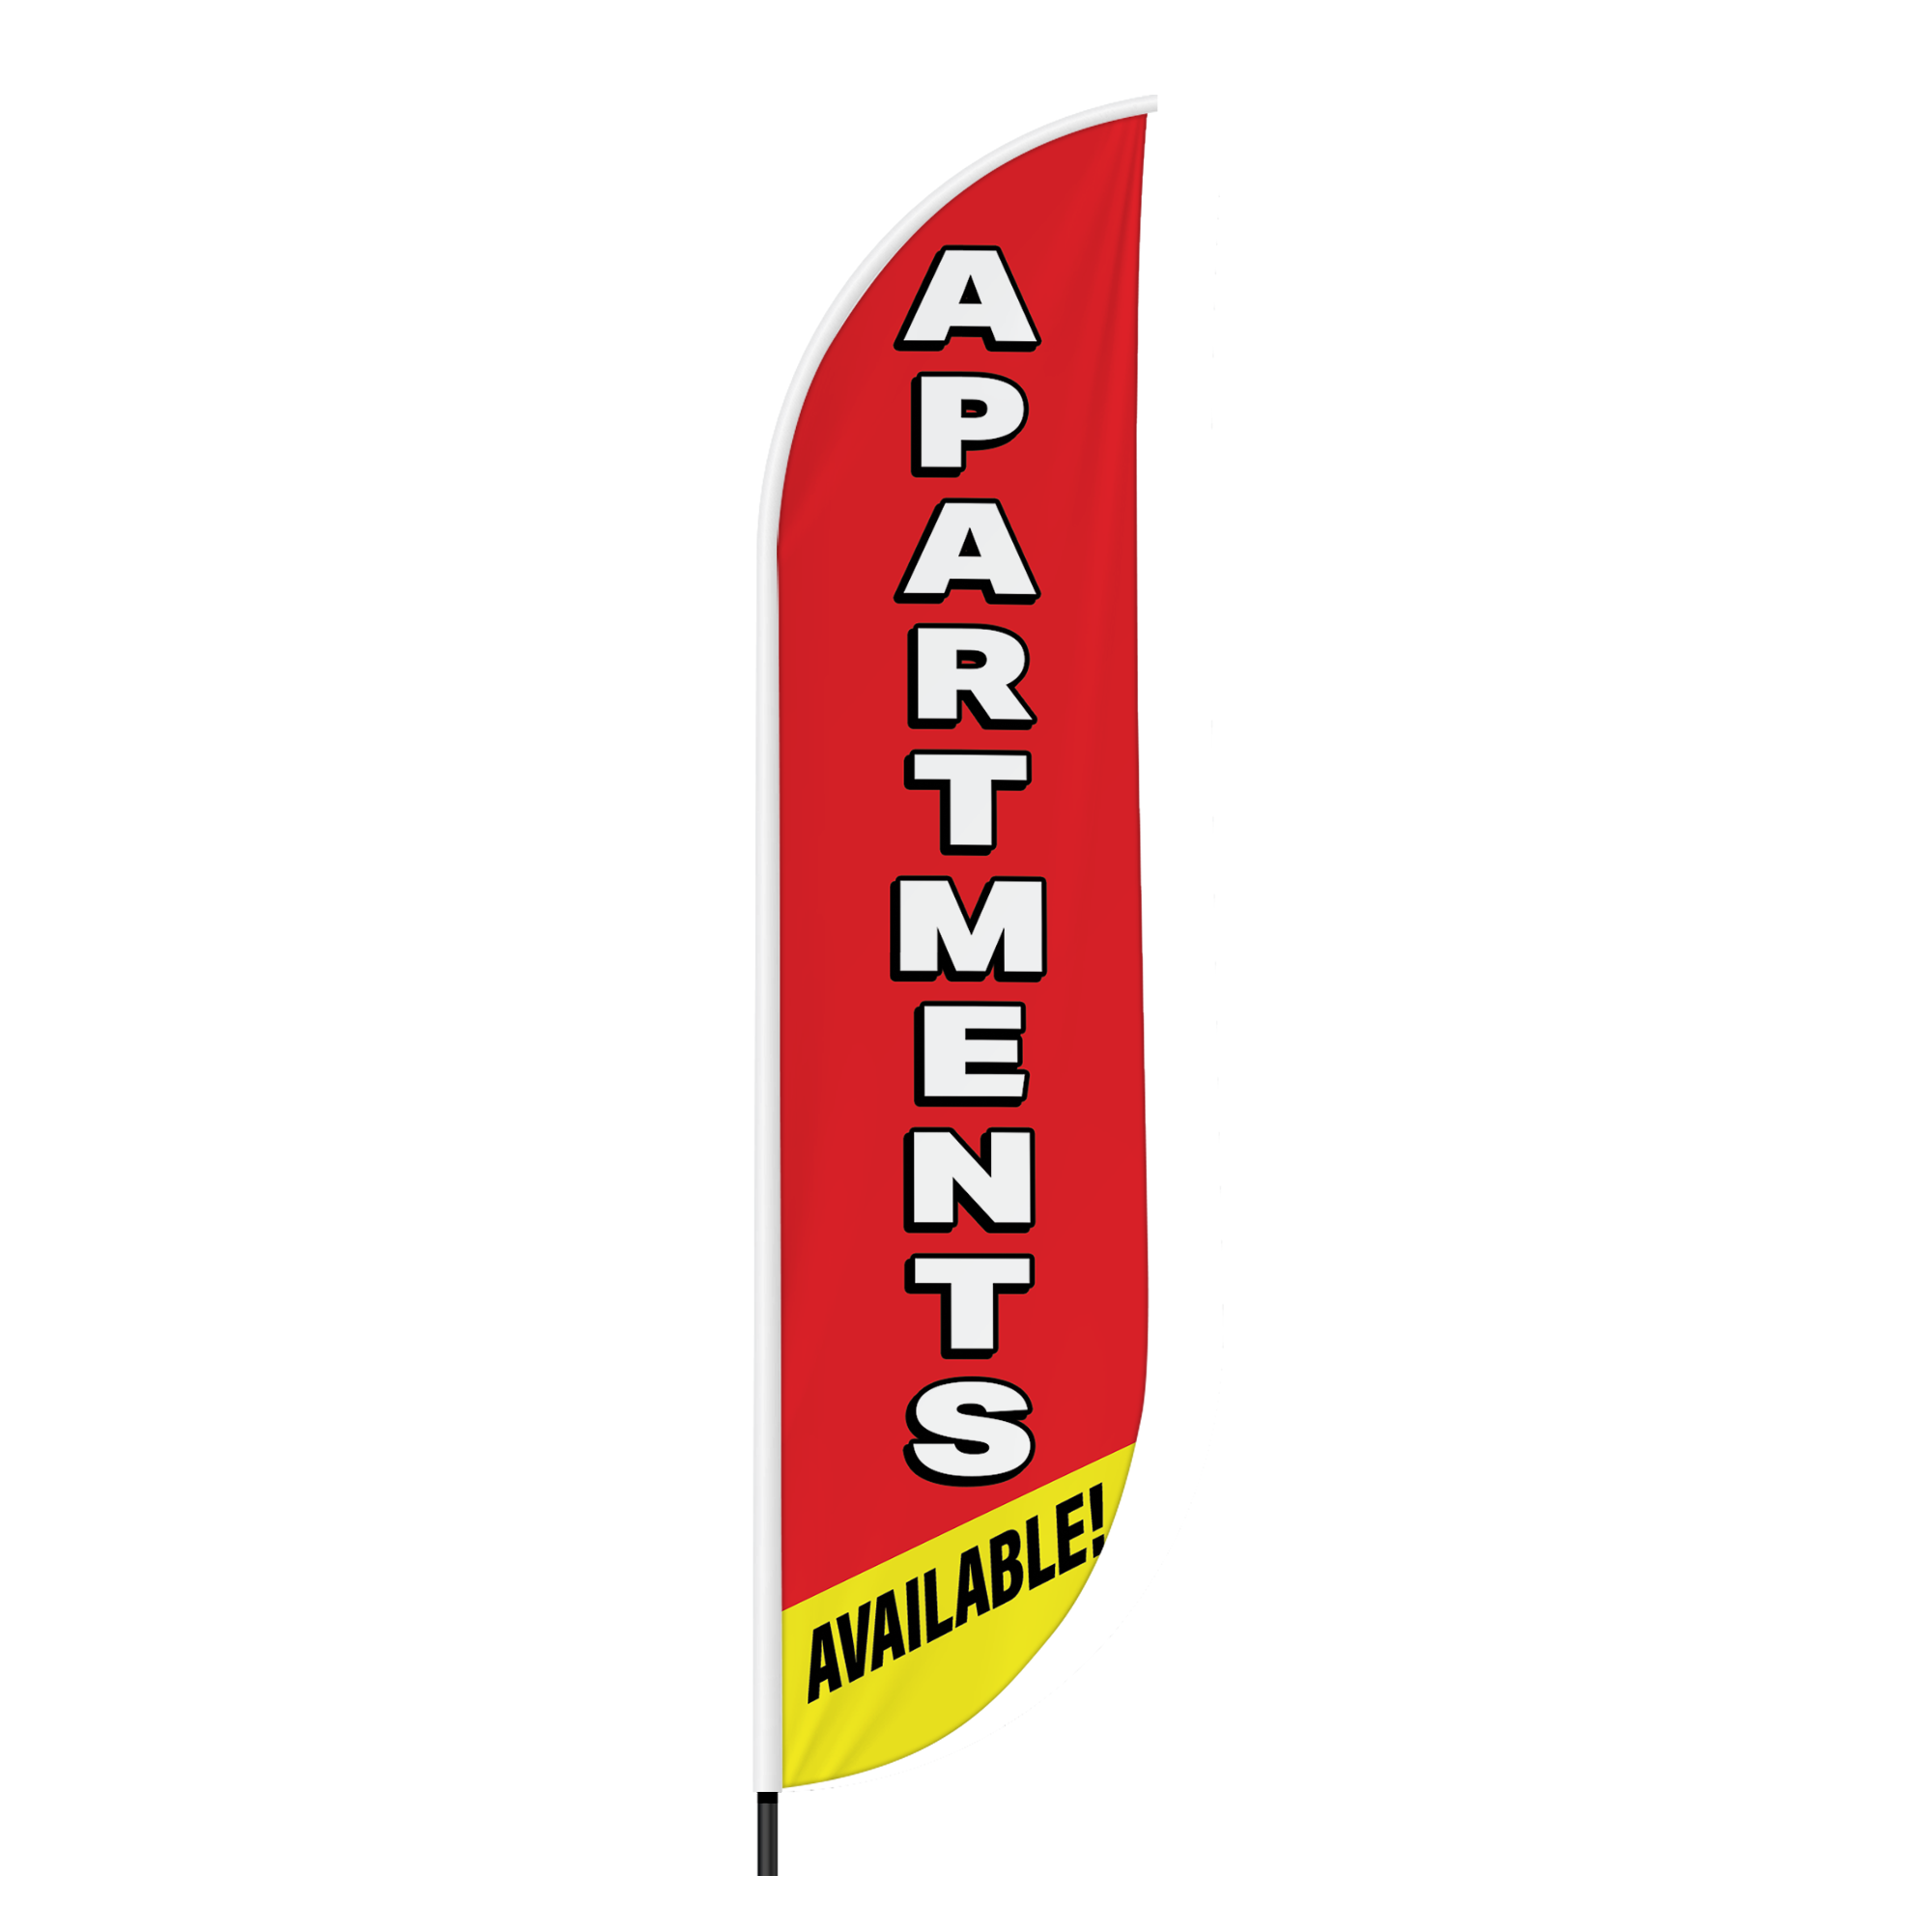 Apartments Feather Flag / Swooper Flag